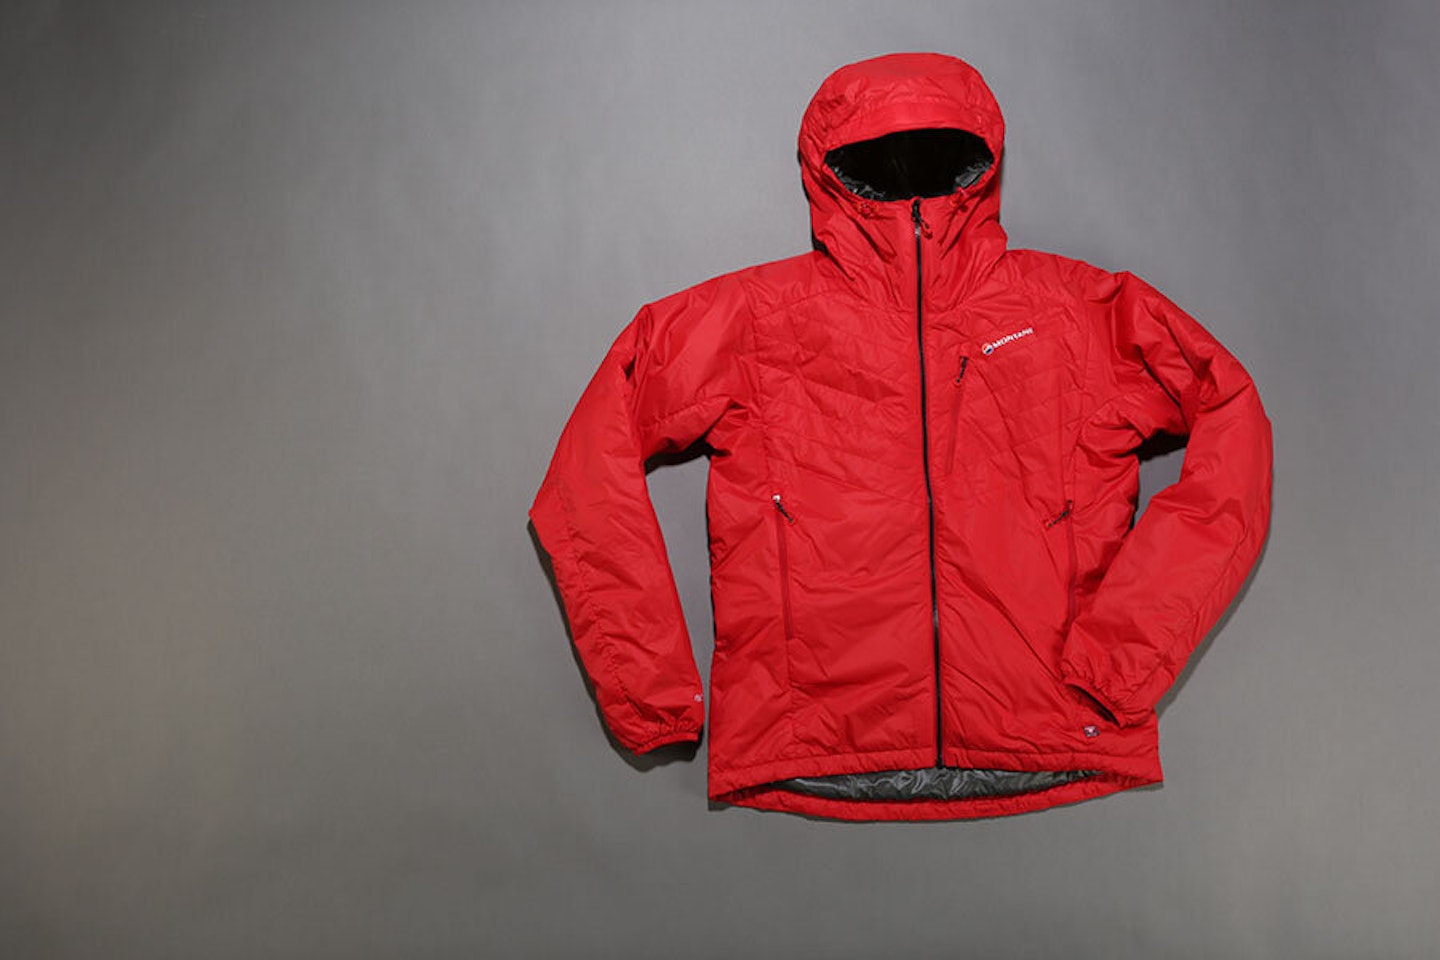 NEW MONTANE PRISM SYNTHETIC INSULATED JACKET REVIEWED